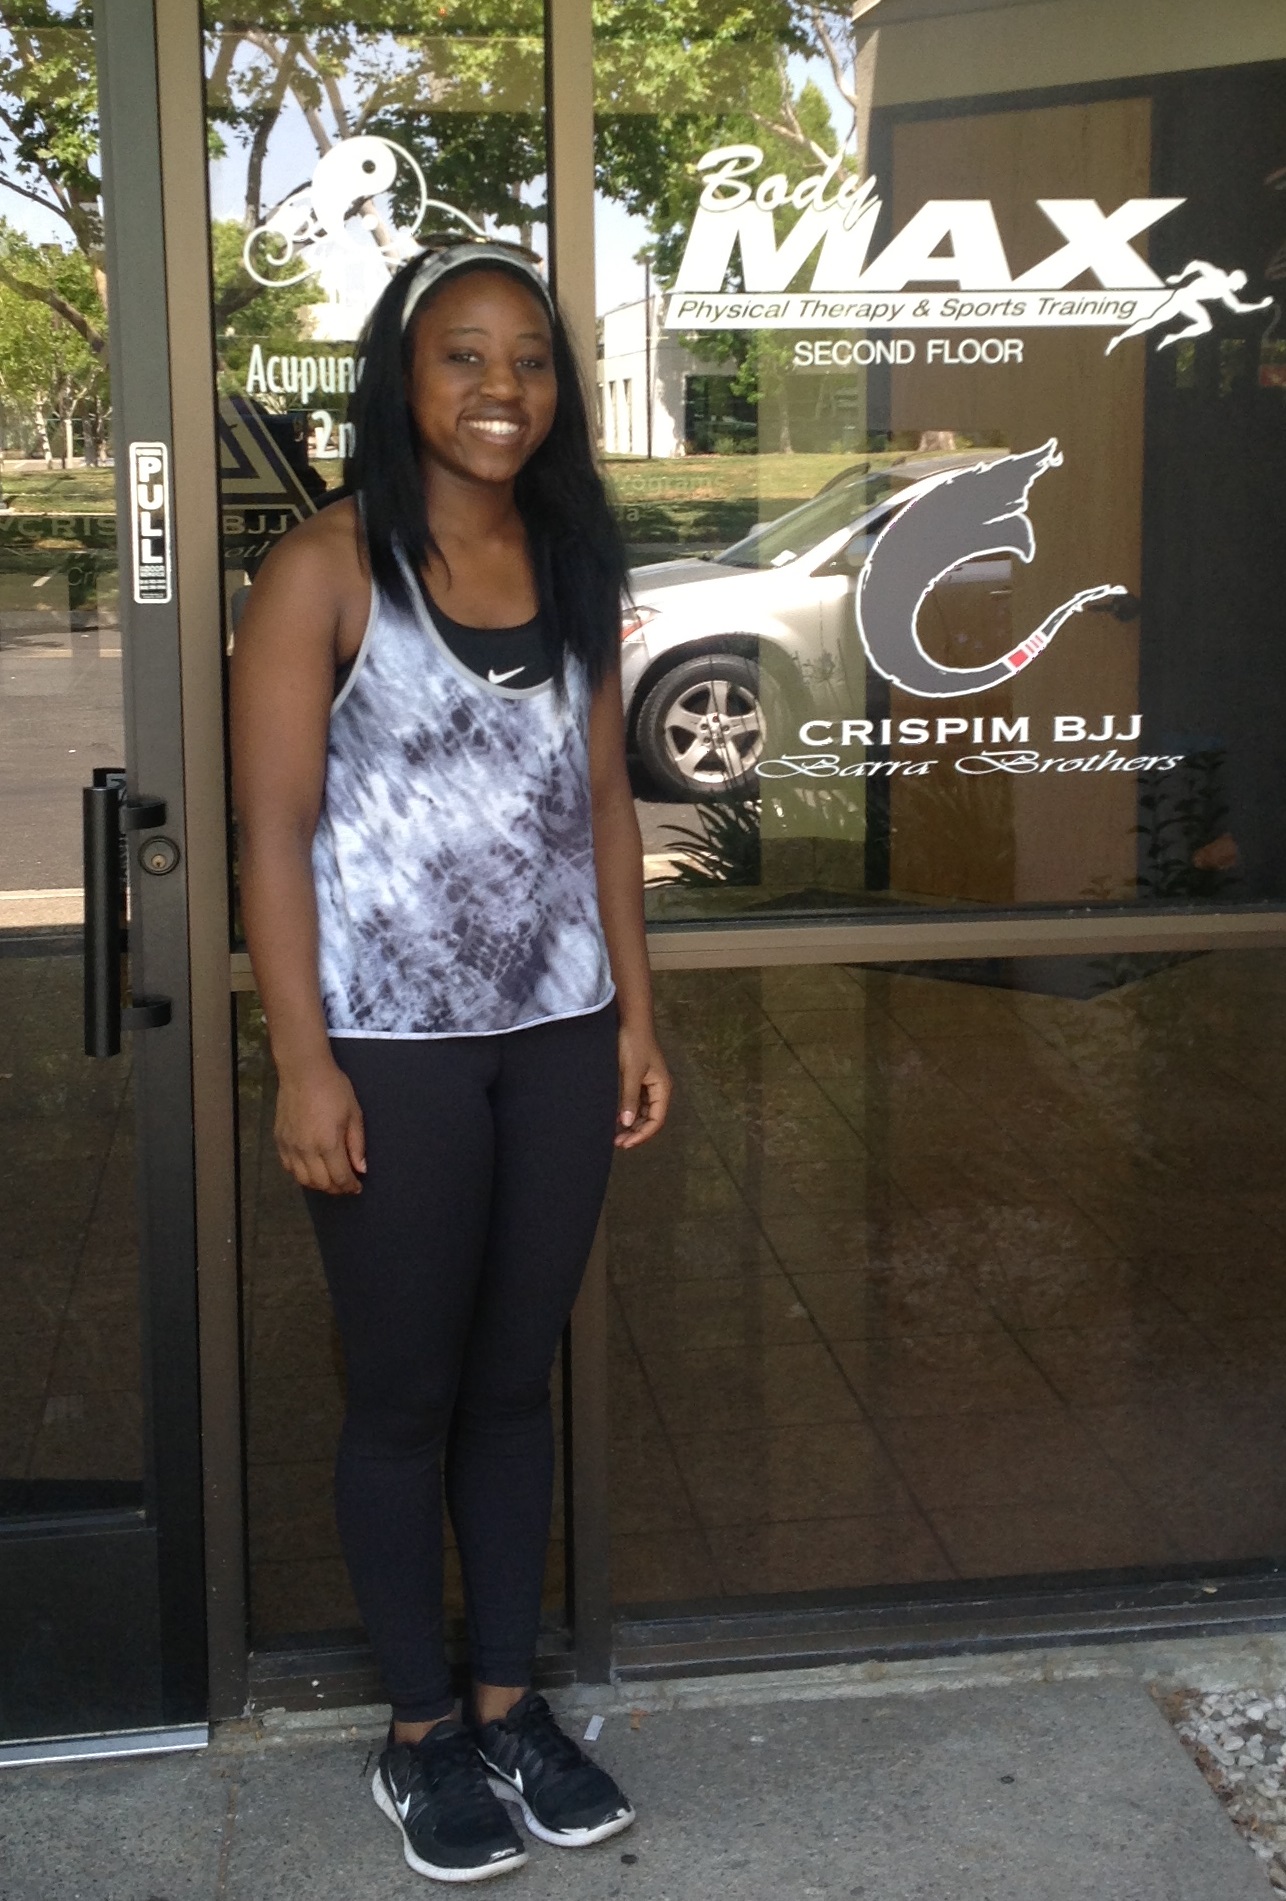 Briana Gaines at BodyMax Physical Therapy and Sports Training